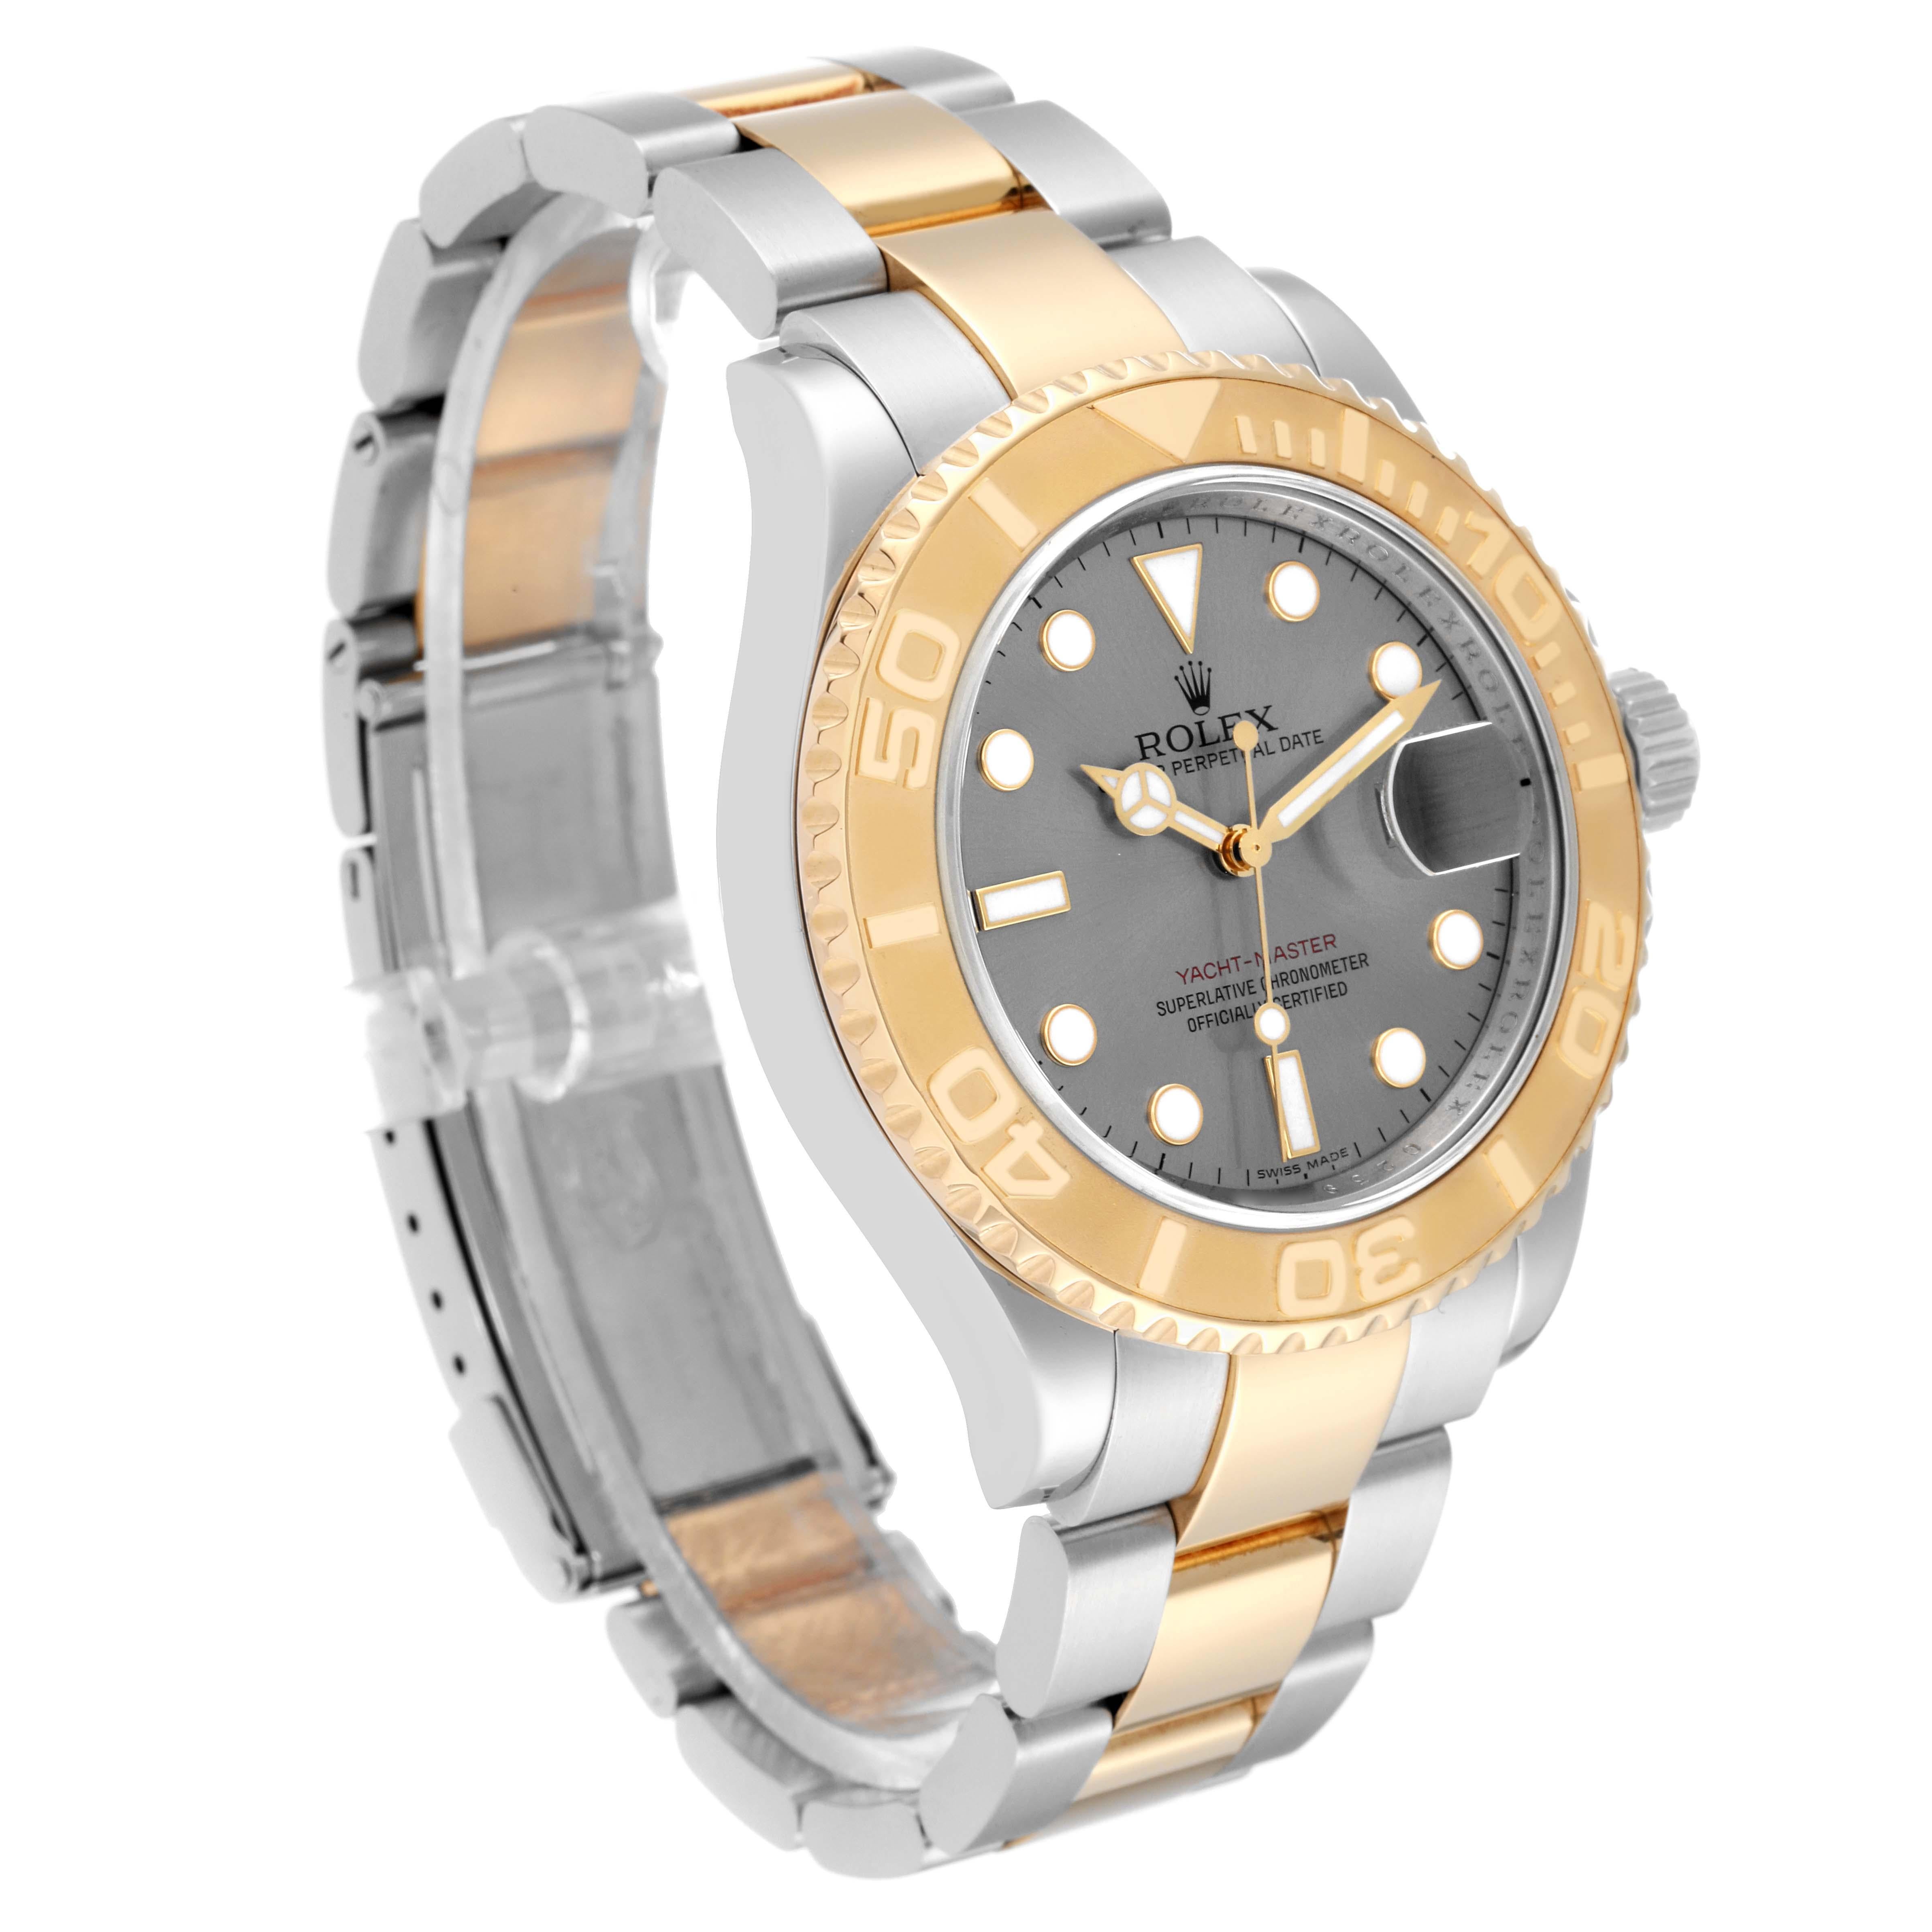 Rolex Yachtmaster Steel Yellow Gold Slate Dial Mens Watch 16623 Box Card In Excellent Condition For Sale In Atlanta, GA